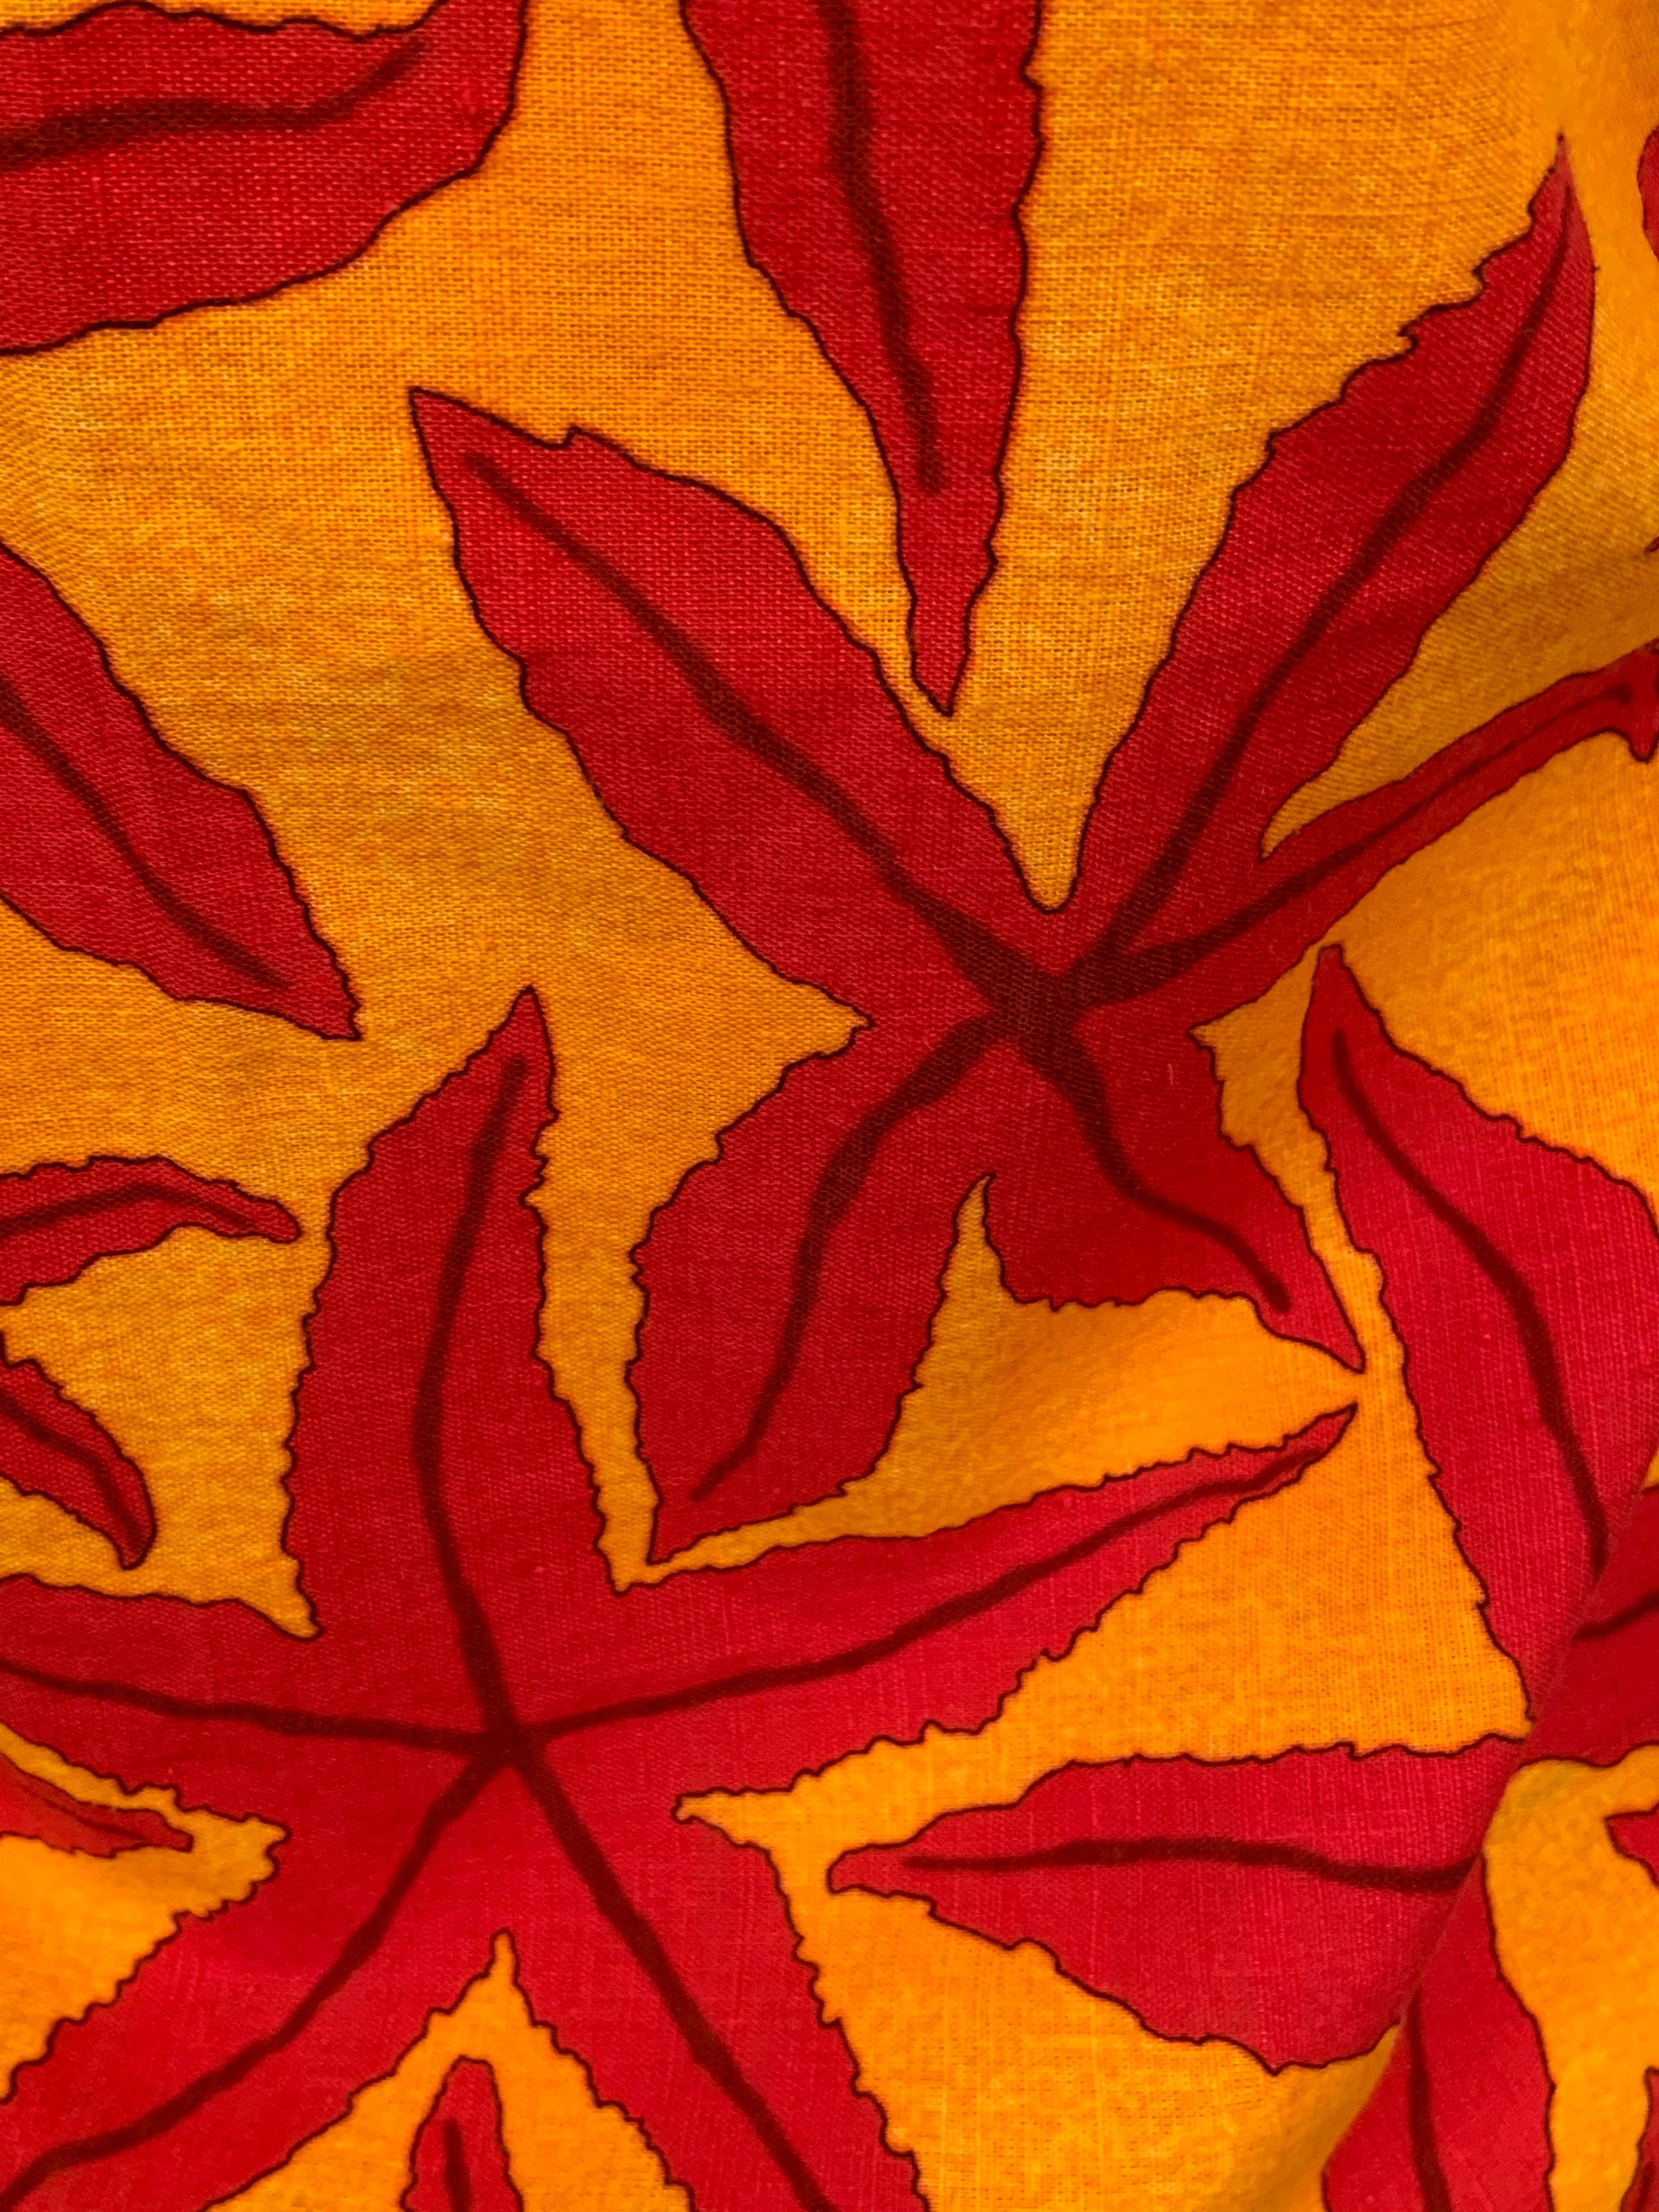 Hermes, Paris Tropical Starfish Patterned Red and Yellow Pareo, Wrap or Shawl 1